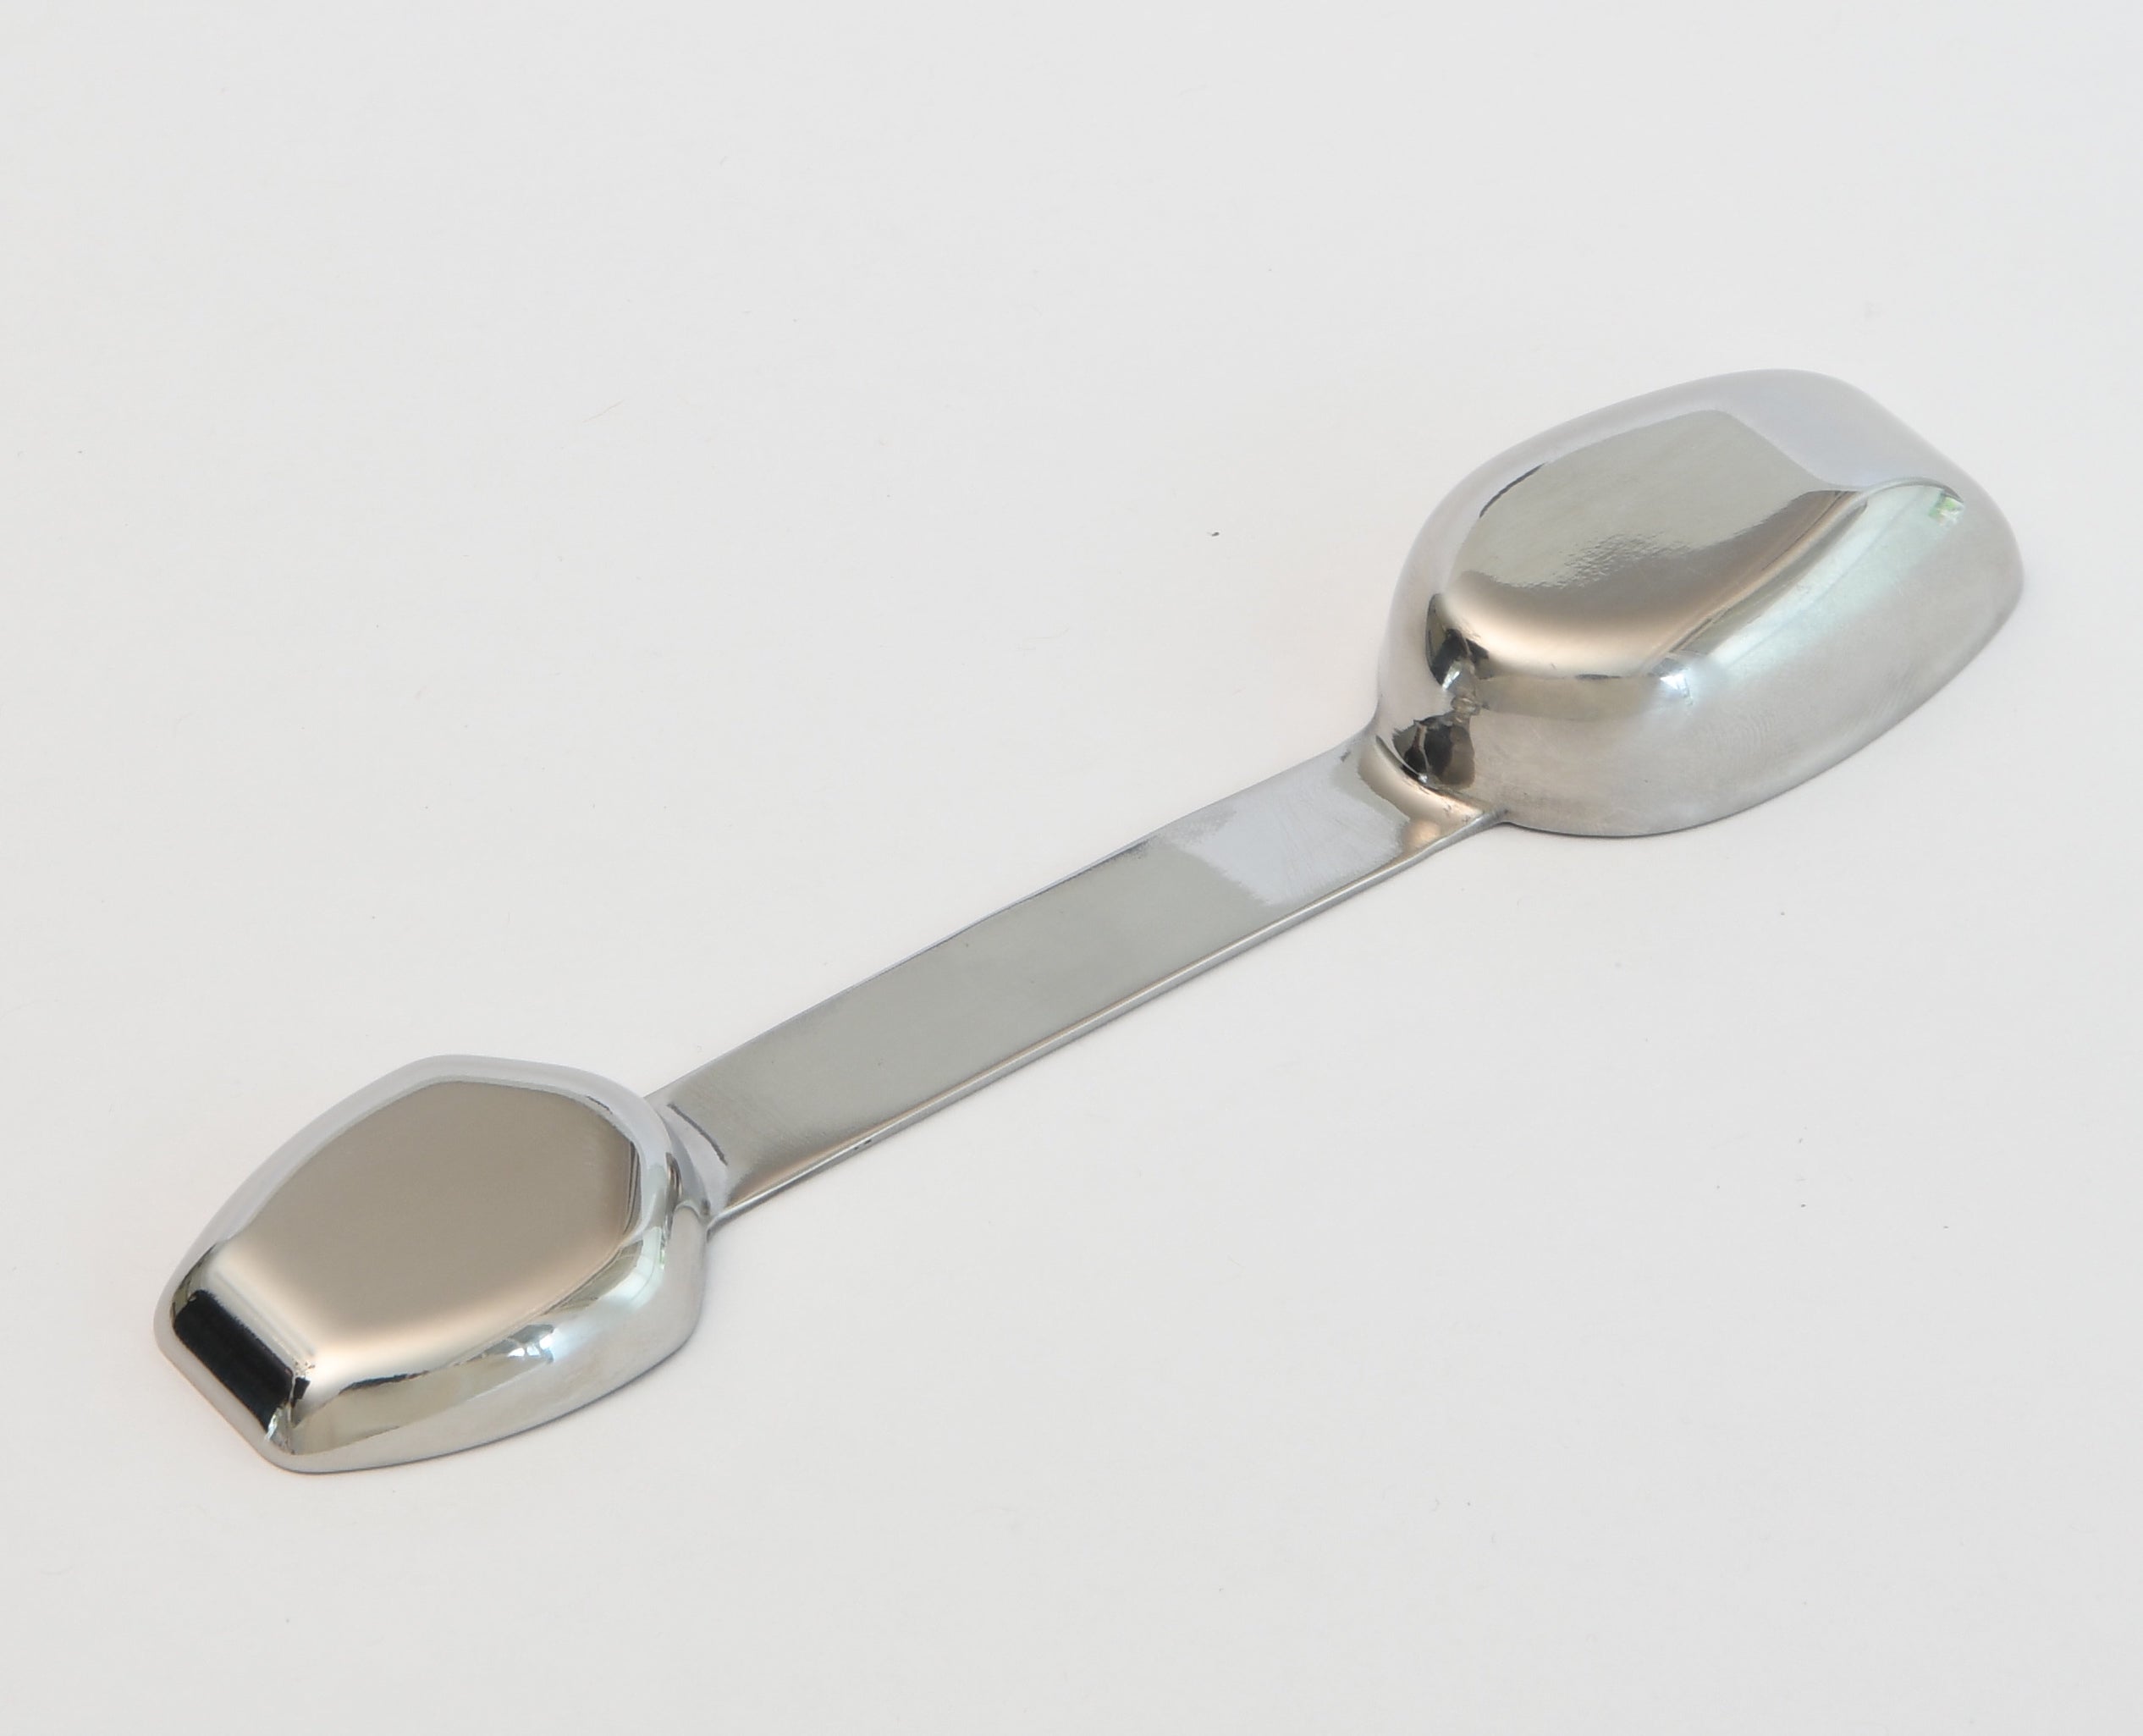 Double-Sided Stainless Steel Measuring Spoon – HausLogic